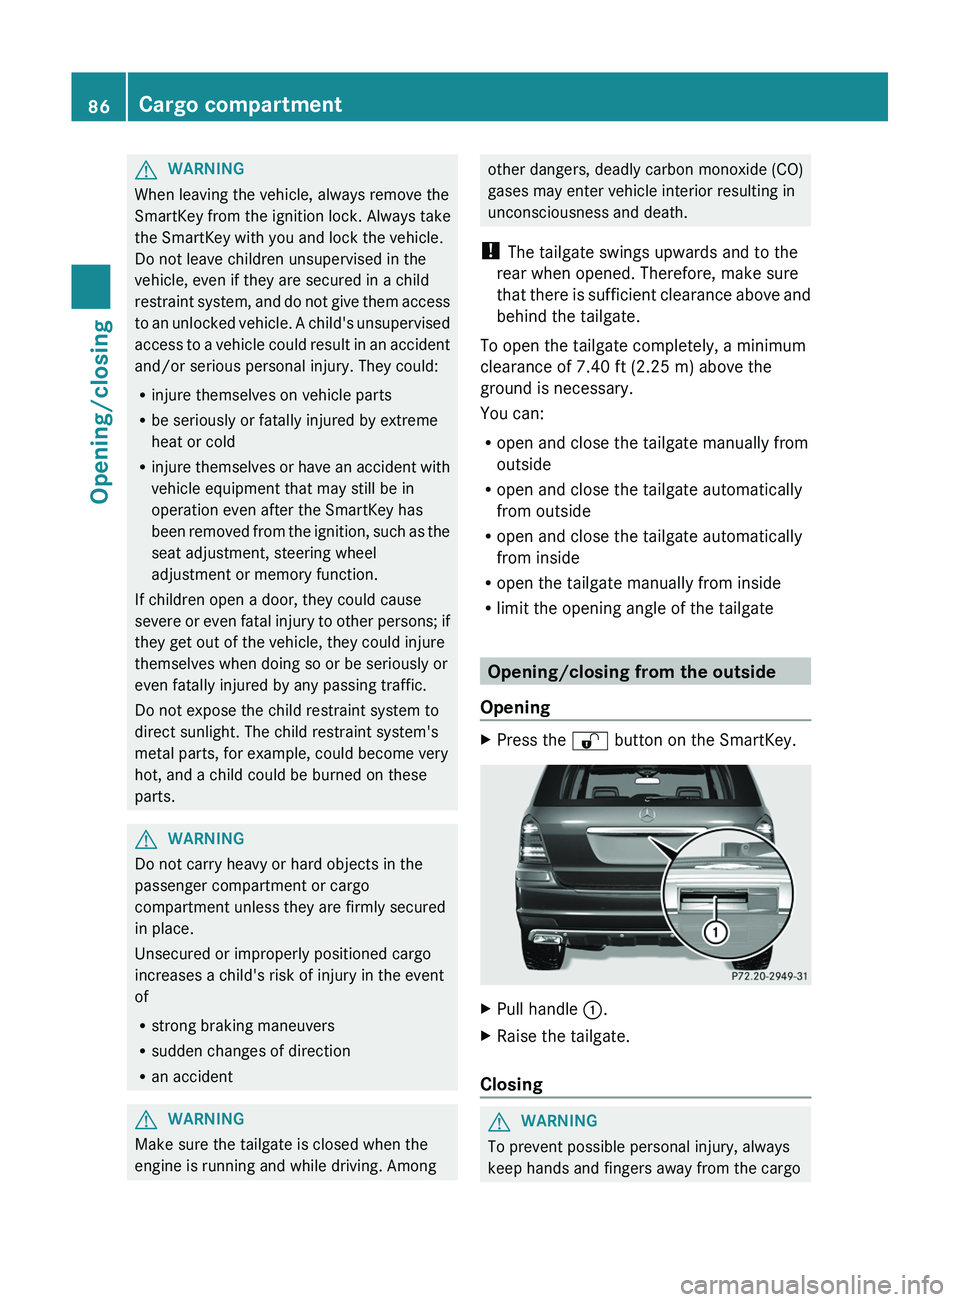 MERCEDES-BENZ GL 2012  Owners Manual GWARNING
When leaving the vehicle, always remove the
SmartKey from the ignition lock. Always take
the SmartKey with you and lock the vehicle.
Do not leave children unsupervised in the
vehicle, even if